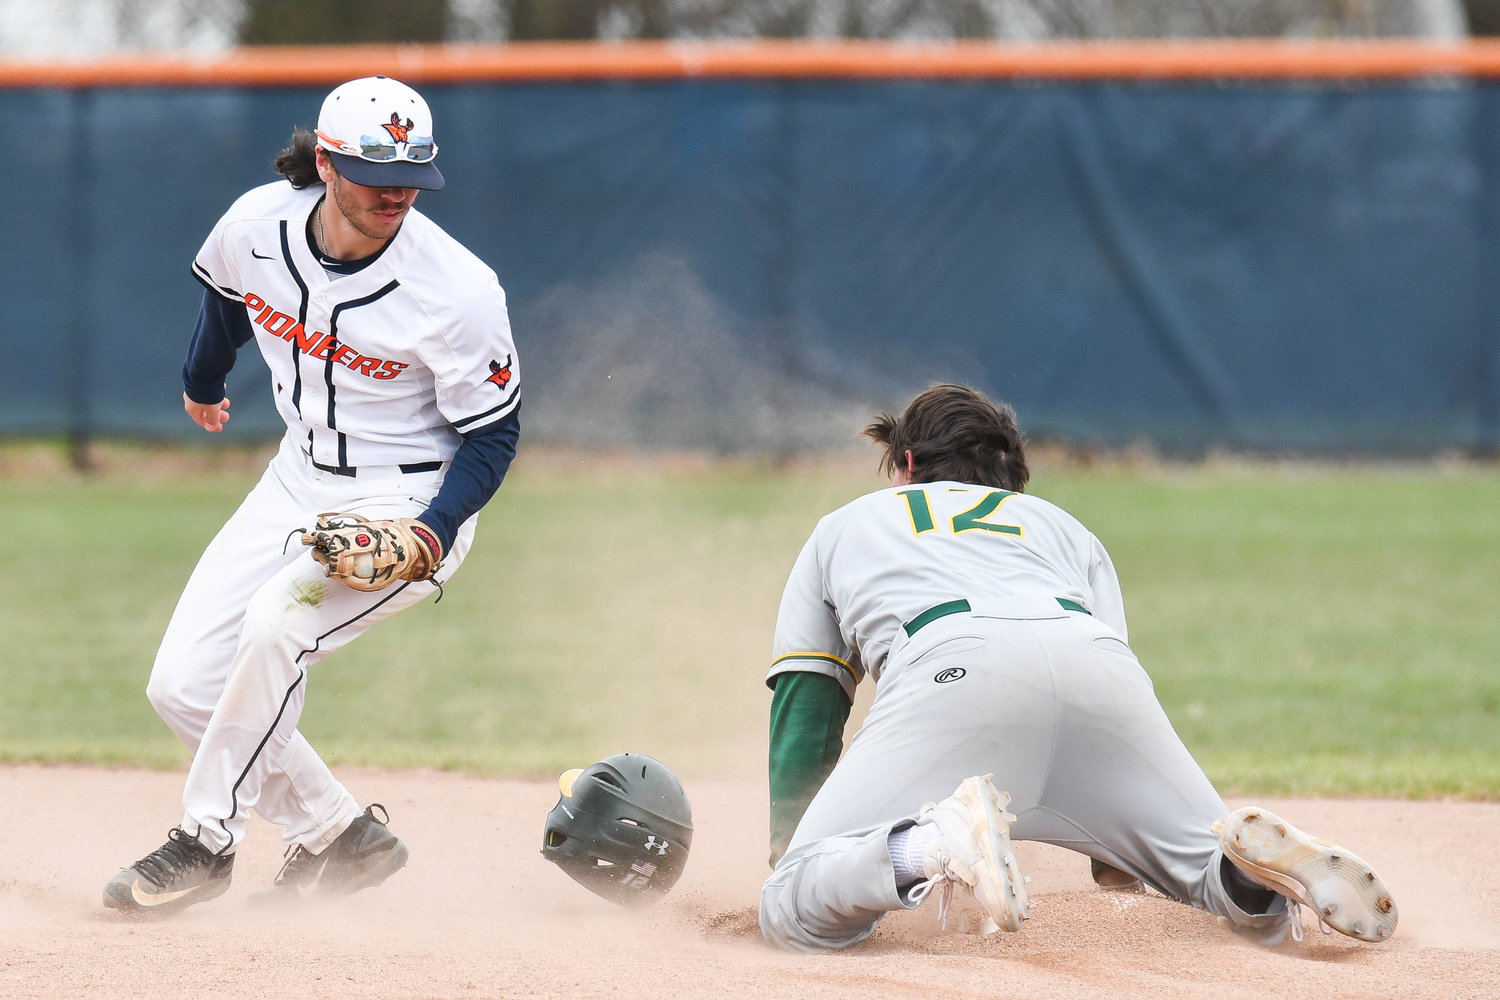 TRYING FOR TWO — From left, Utica University player Zac Cronk attempts to tag out Keuka College's Kole Schmerder (12) during game two of a doubleheader on Wednesday.